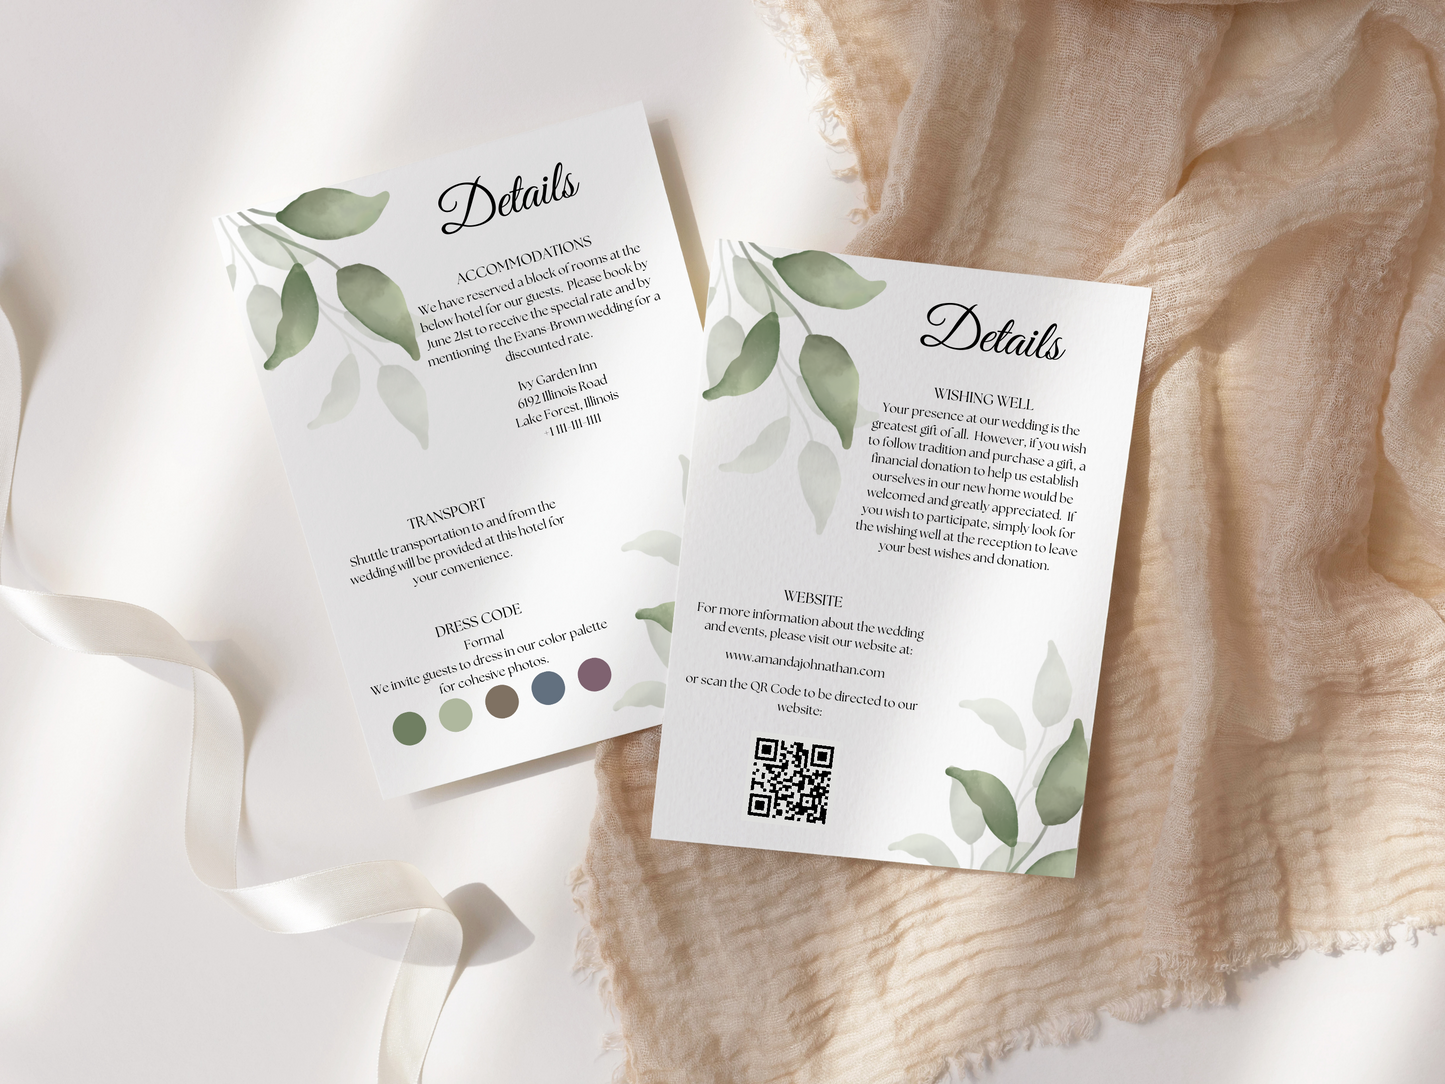 Watercolor Greenery Leaves Wedding Invitation Suite with Envelope Decoration Templates, Printable Templates